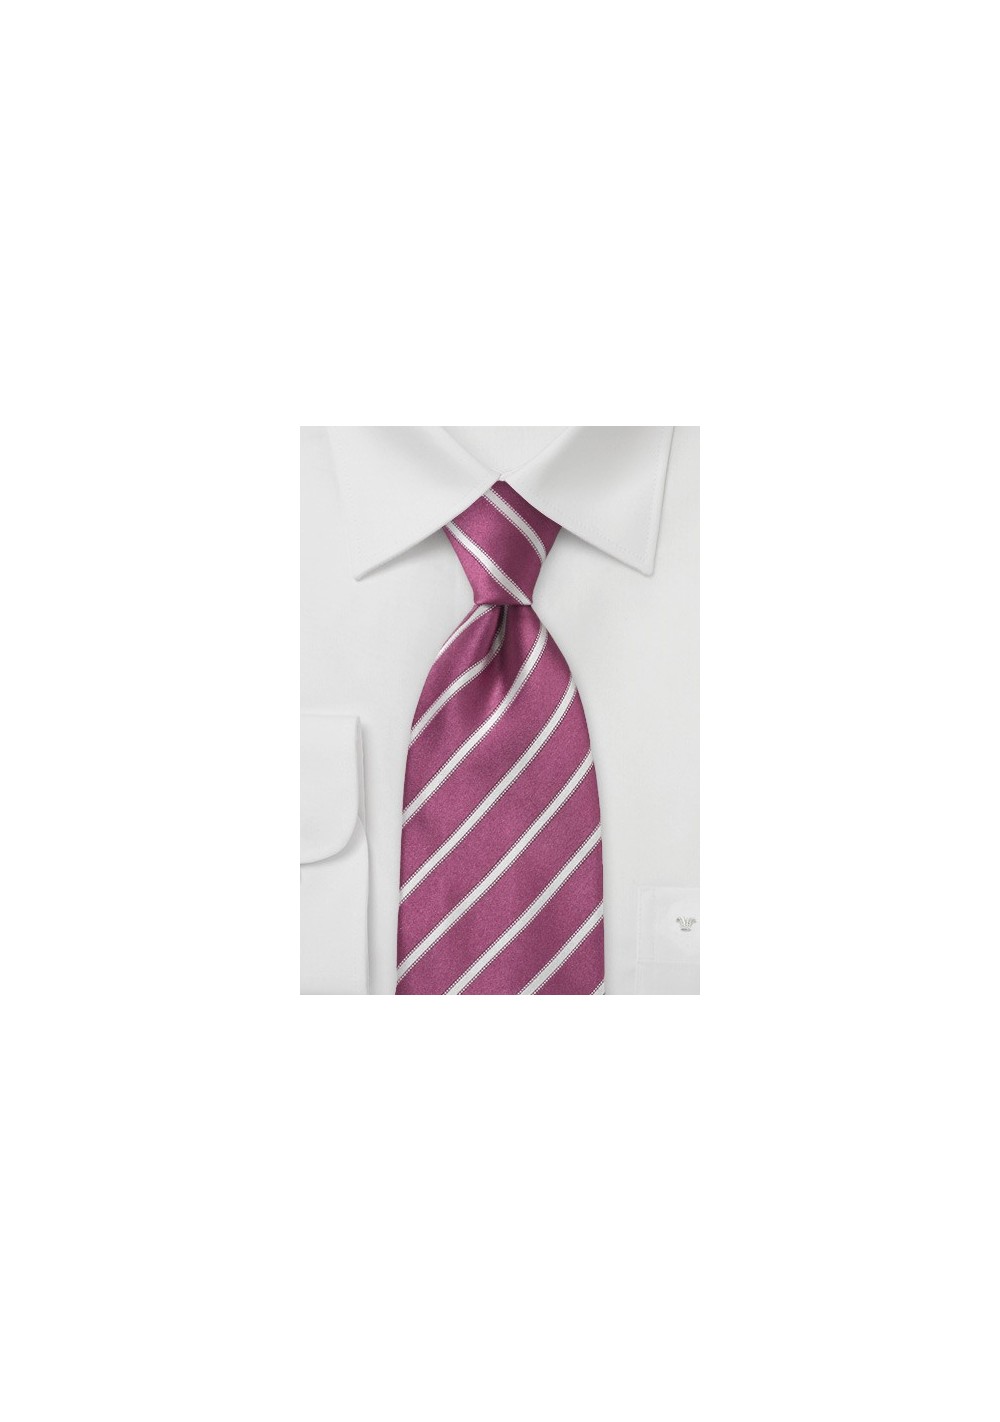 Striped Tie in Begonia Pink